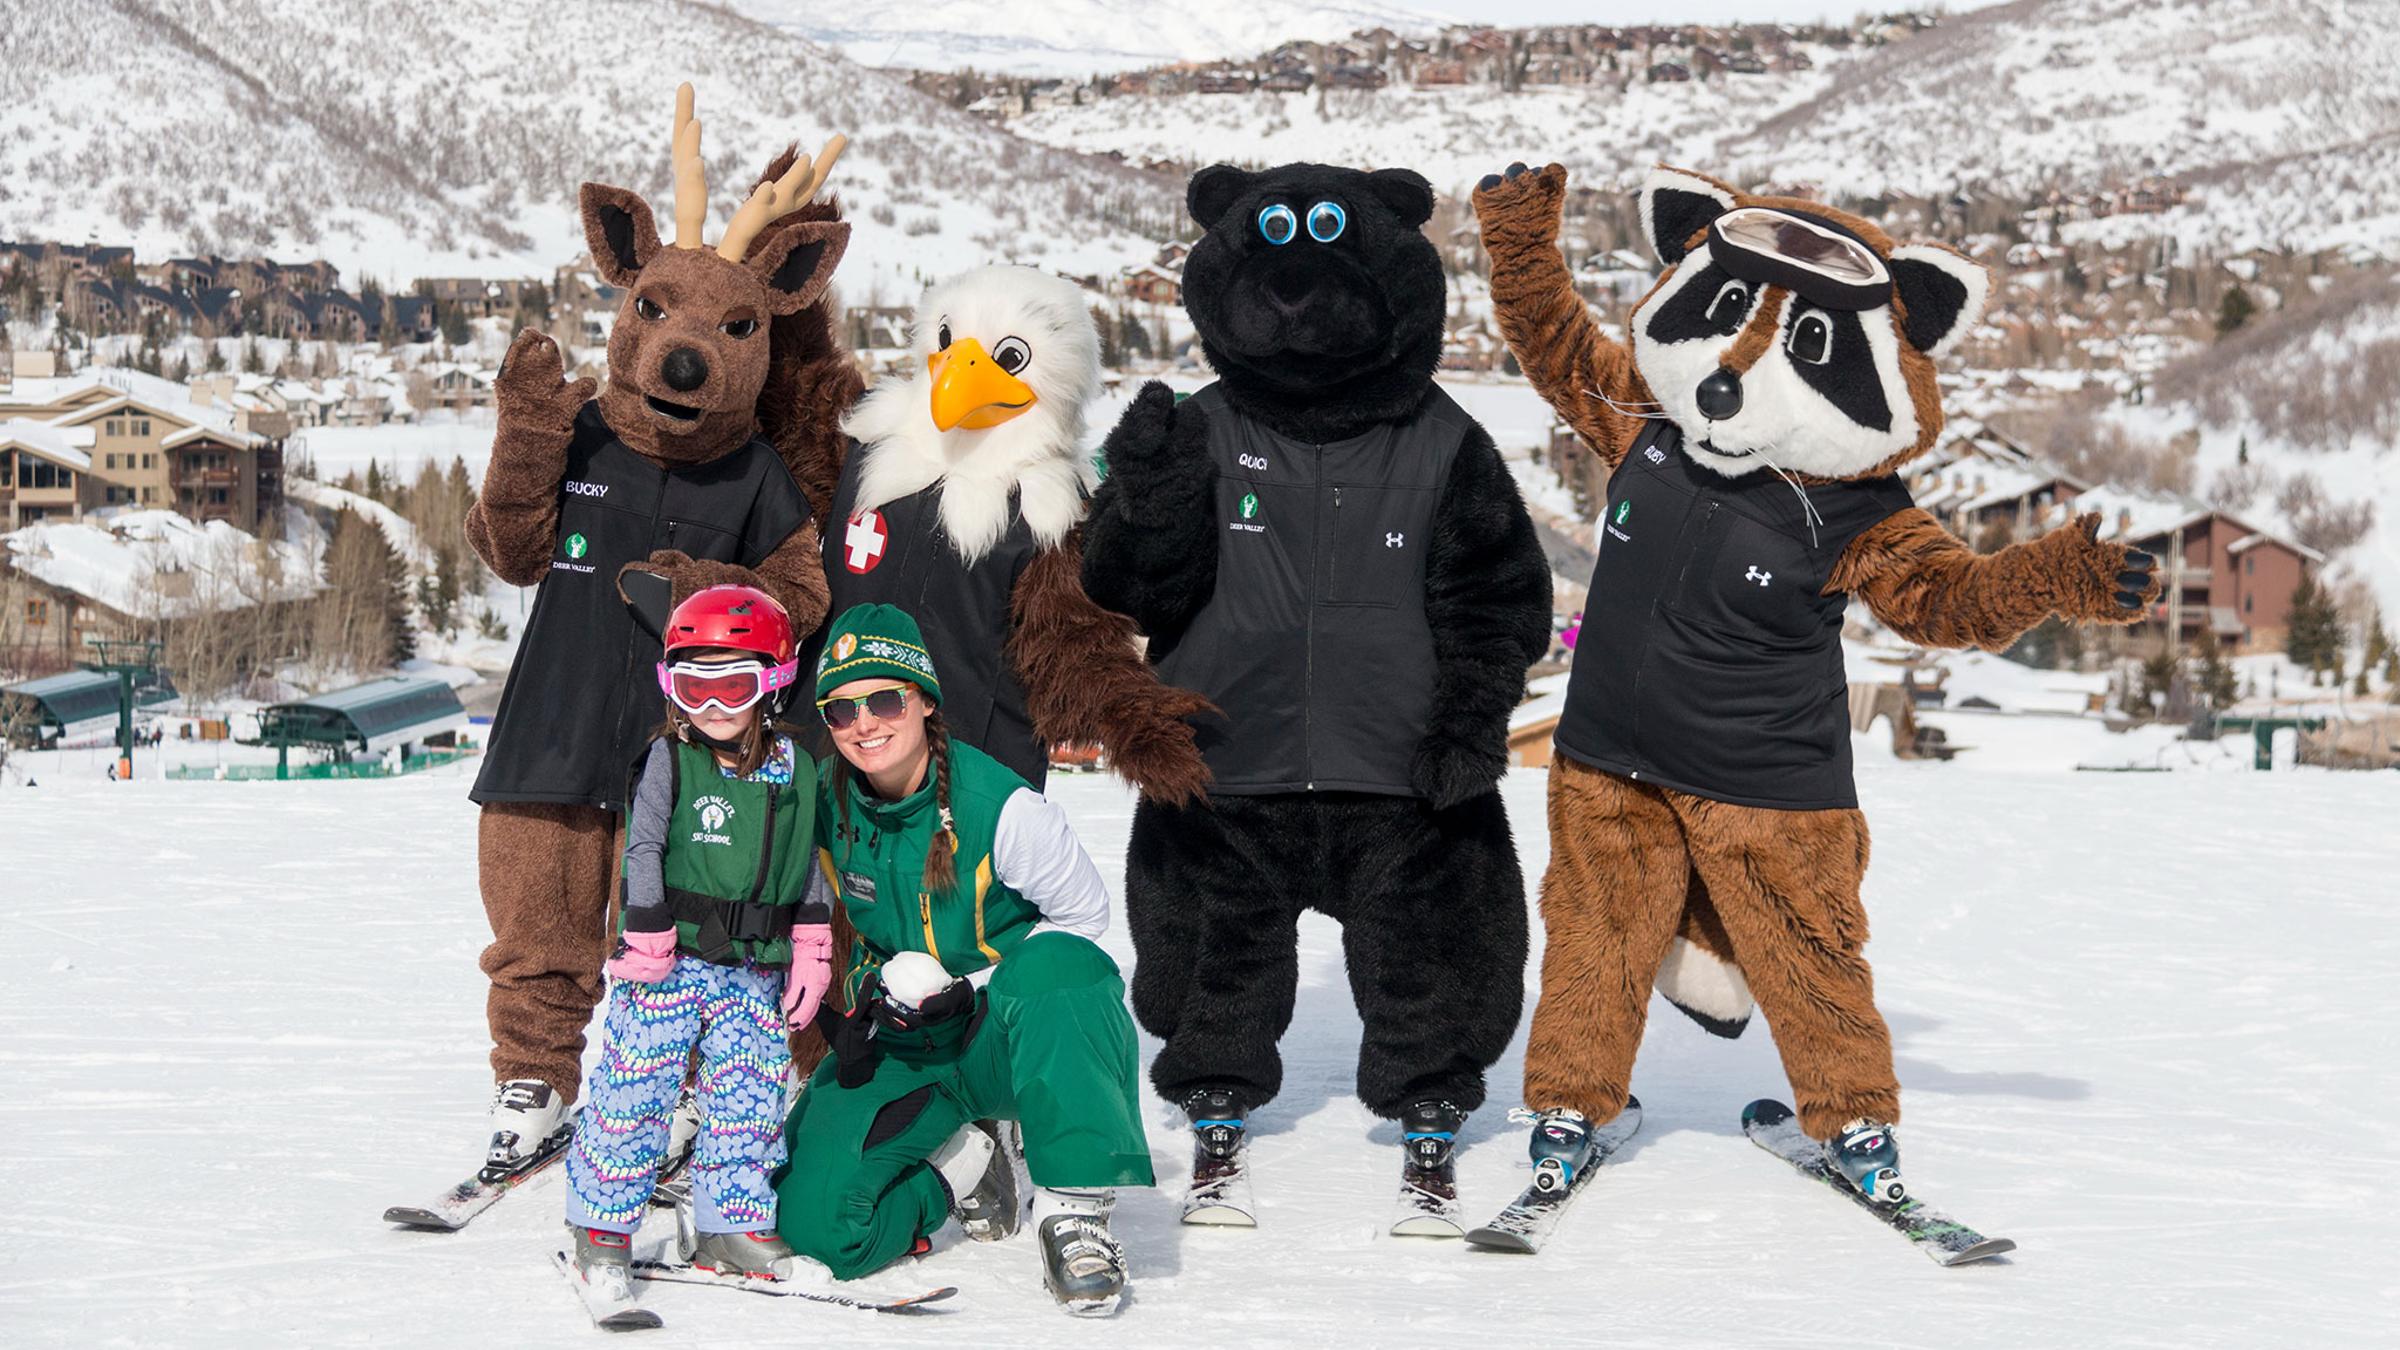 A ski instructor with child and mascots smiling